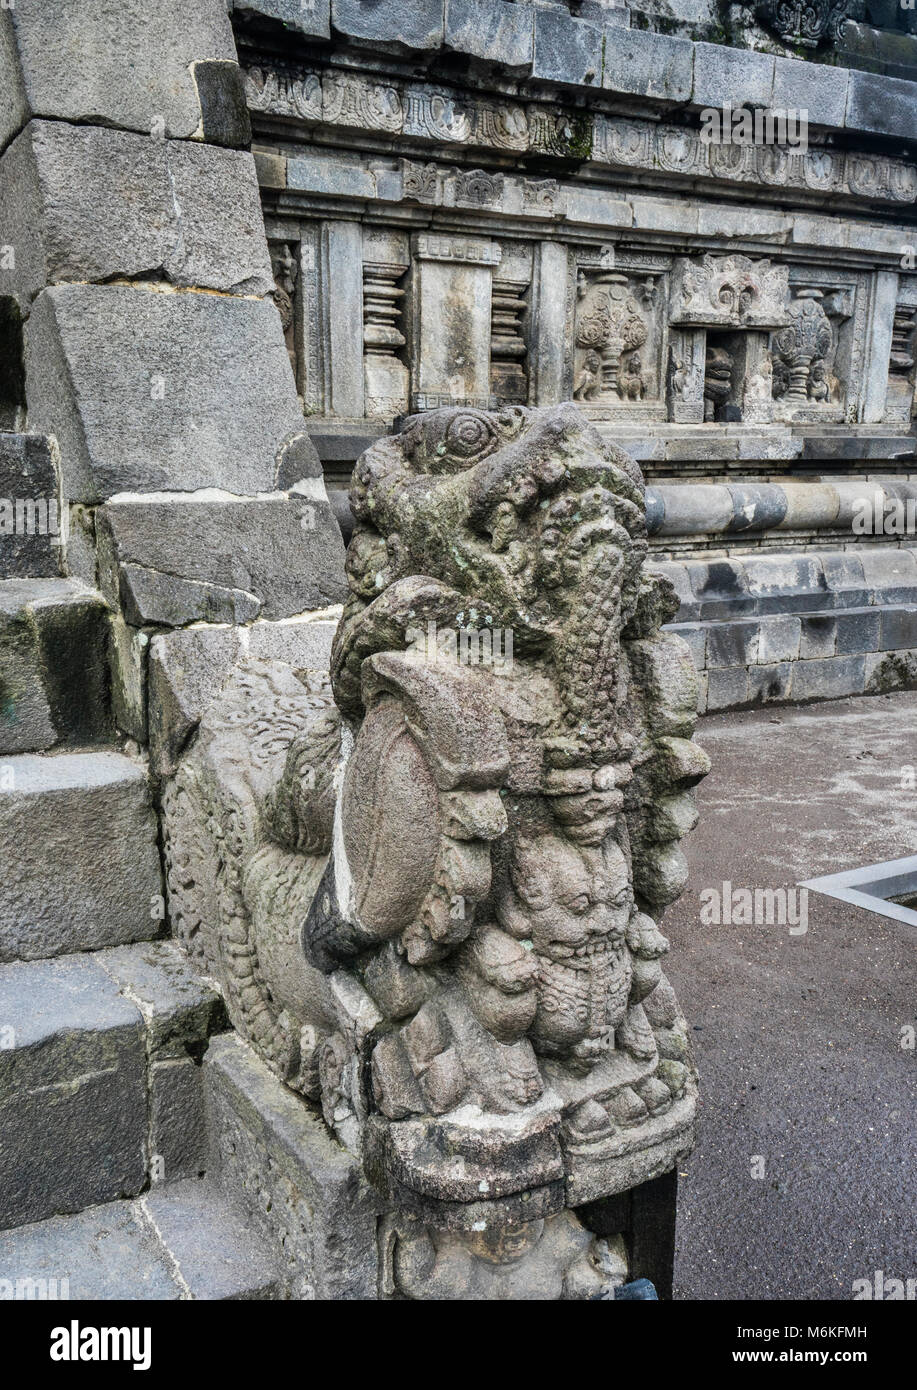 Indonesia, Central Java, guardian figure at the ascent to the Vishnu temple in the mid-9th century Prambanan Hindu Temple complex Stock Photo